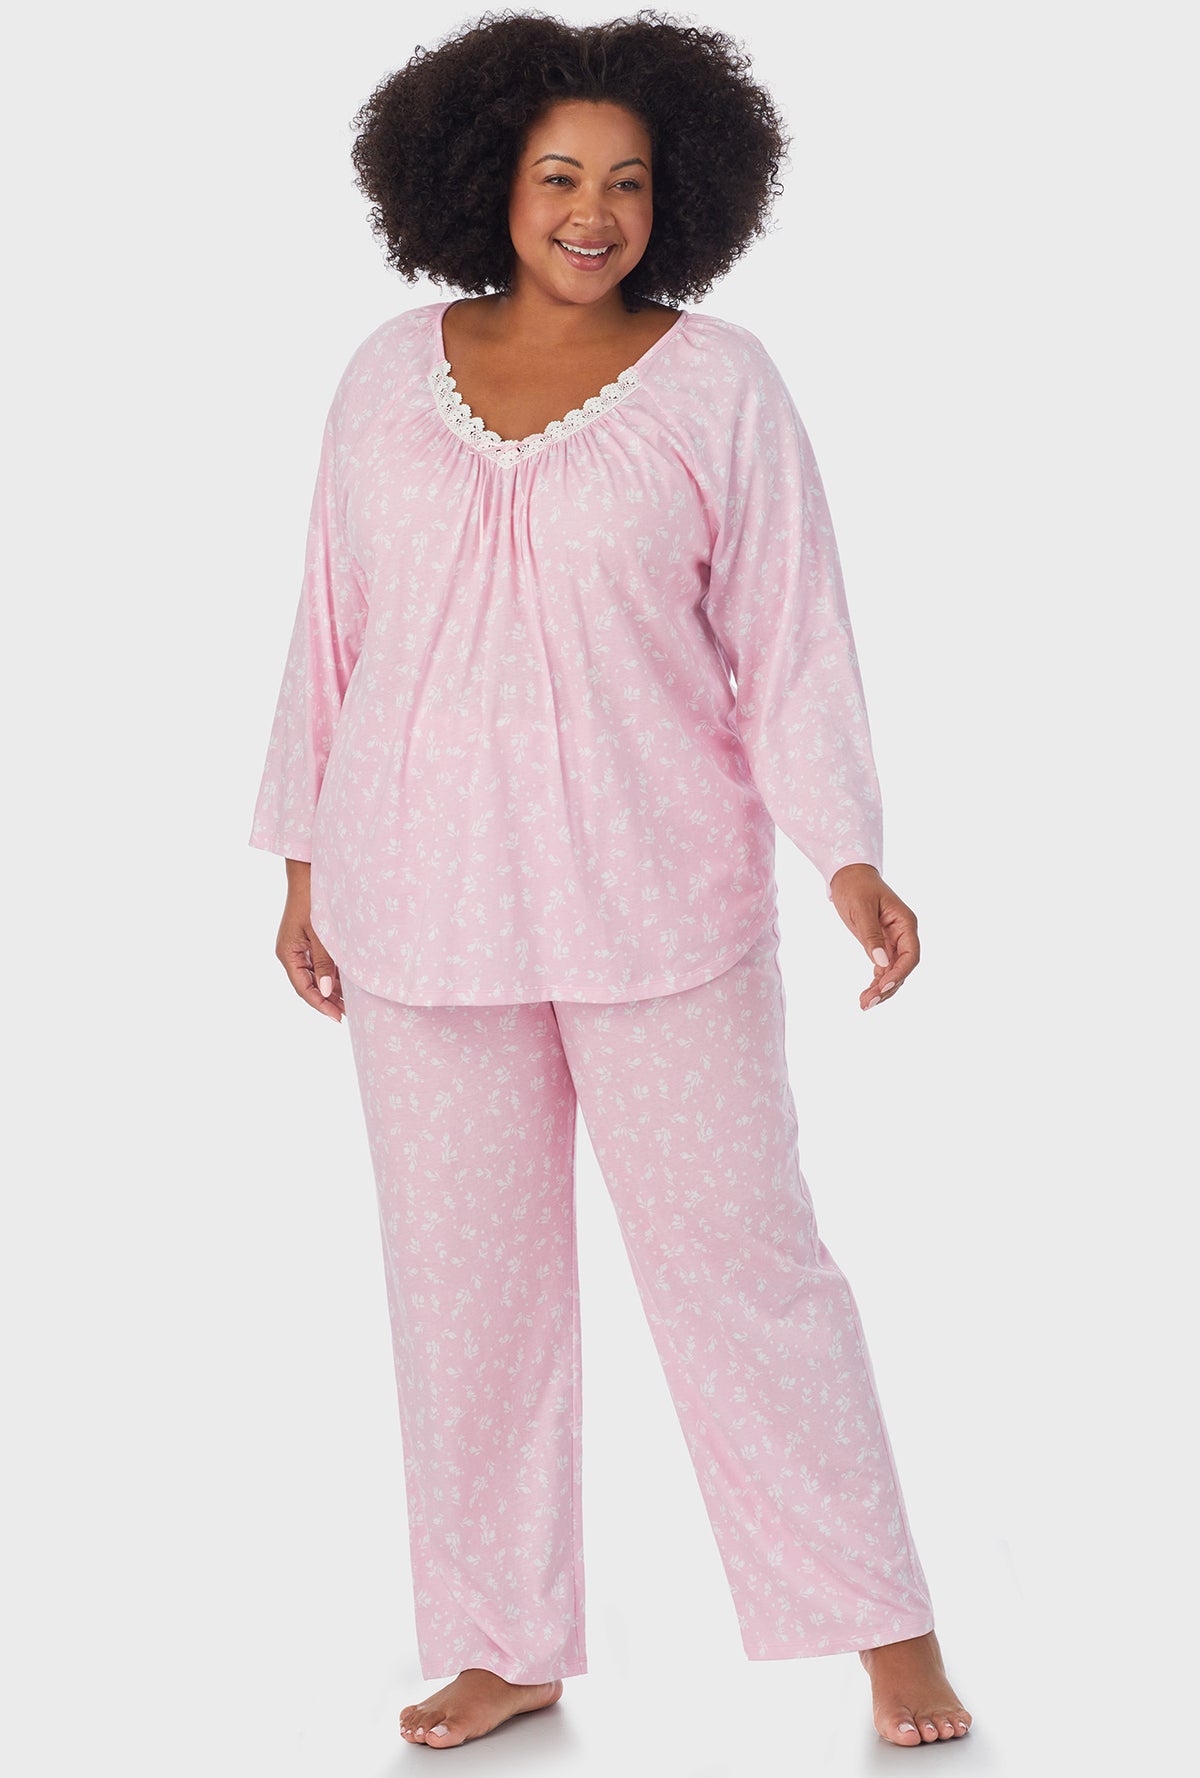 A lady wearing pink 3/4 Sleeve Long Pant plus size PJ Set with White Rosebuds print